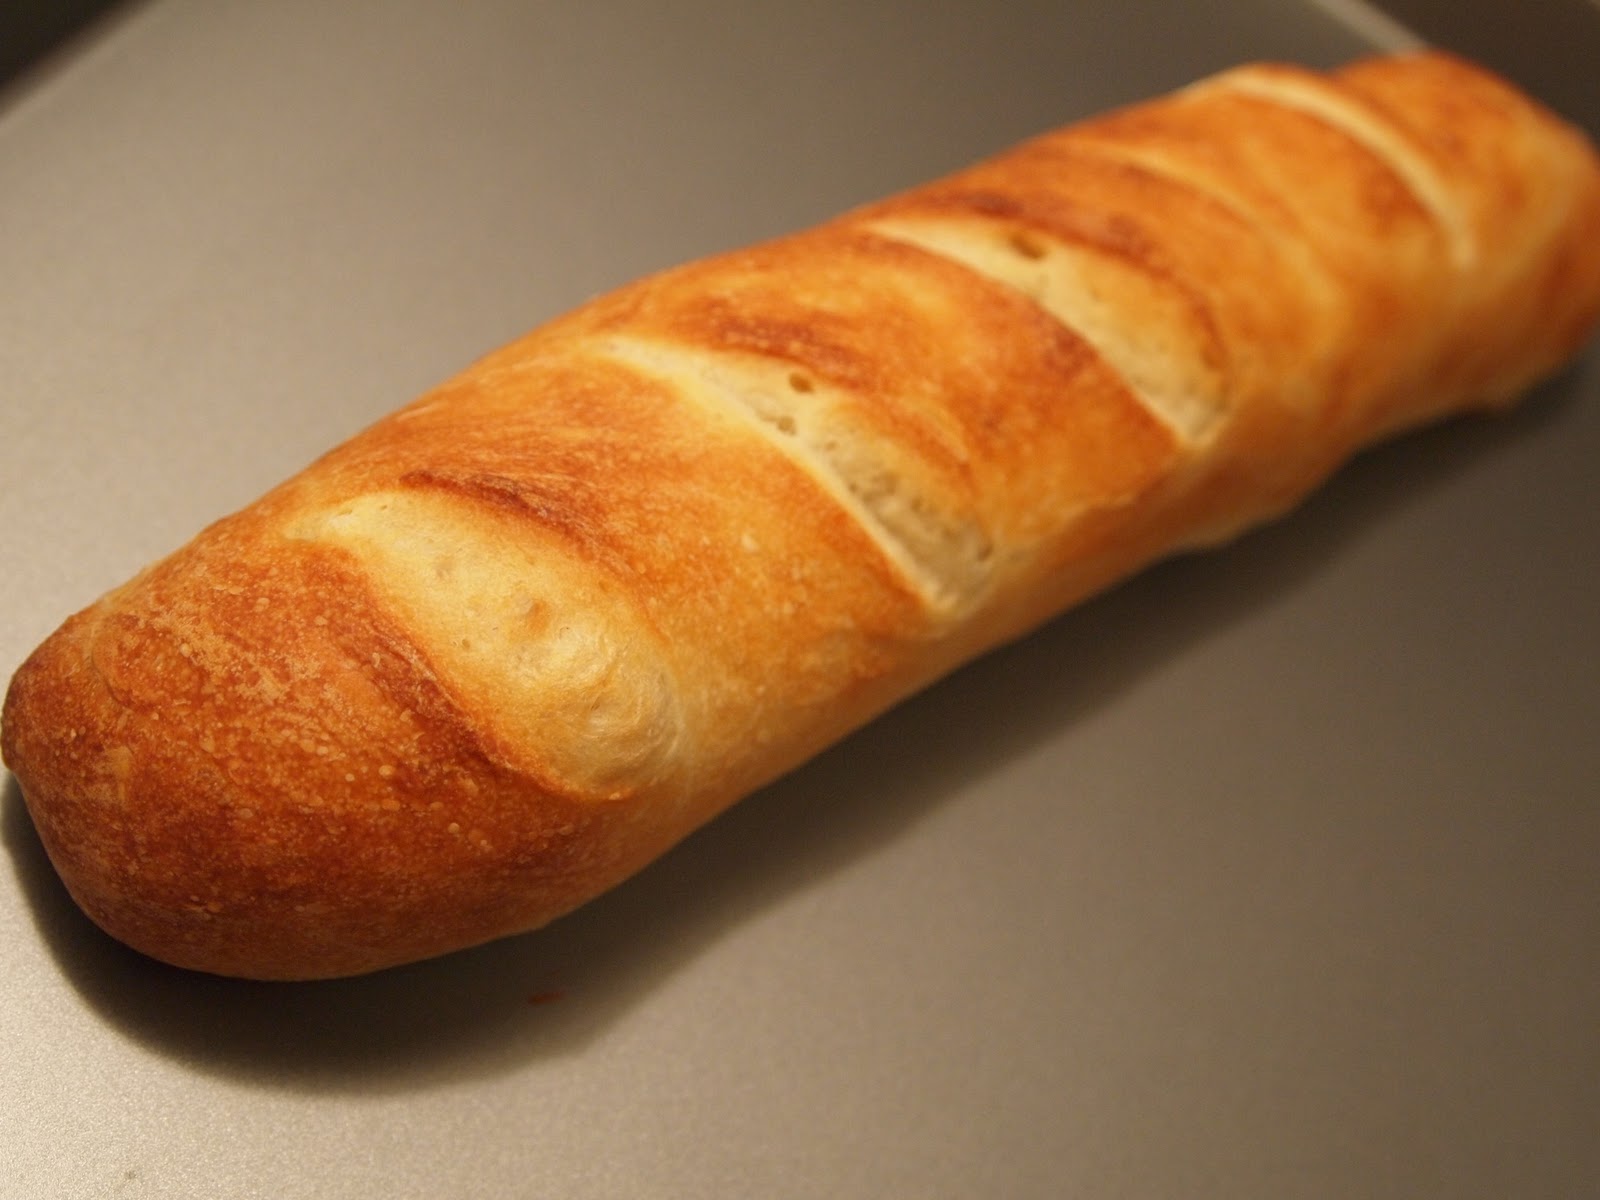 Baking is the New Black: Crusty French Baguette